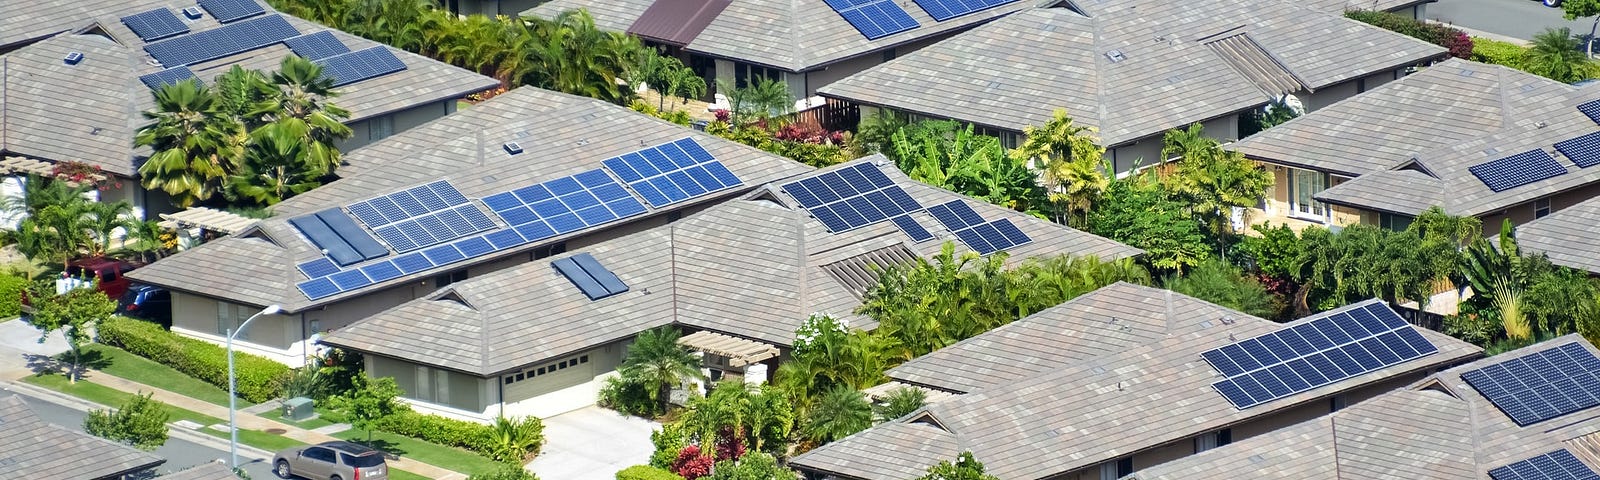 IMAGE: A drone view of a neighborhood with many roofs covered with solar panels